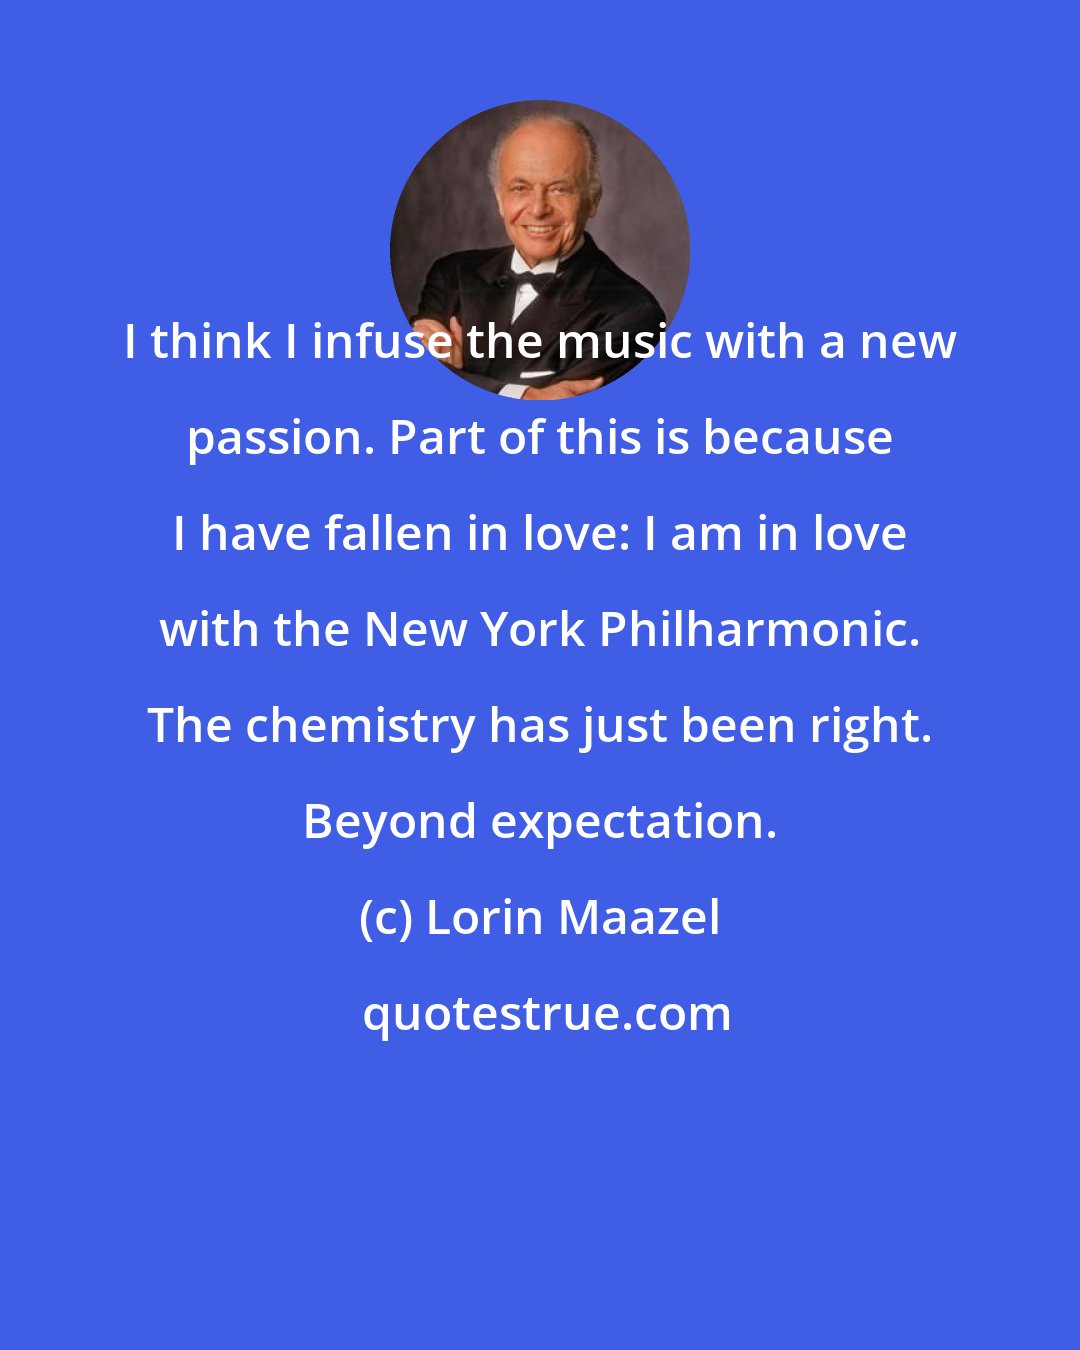 Lorin Maazel: I think I infuse the music with a new passion. Part of this is because I have fallen in love: I am in love with the New York Philharmonic. The chemistry has just been right. Beyond expectation.